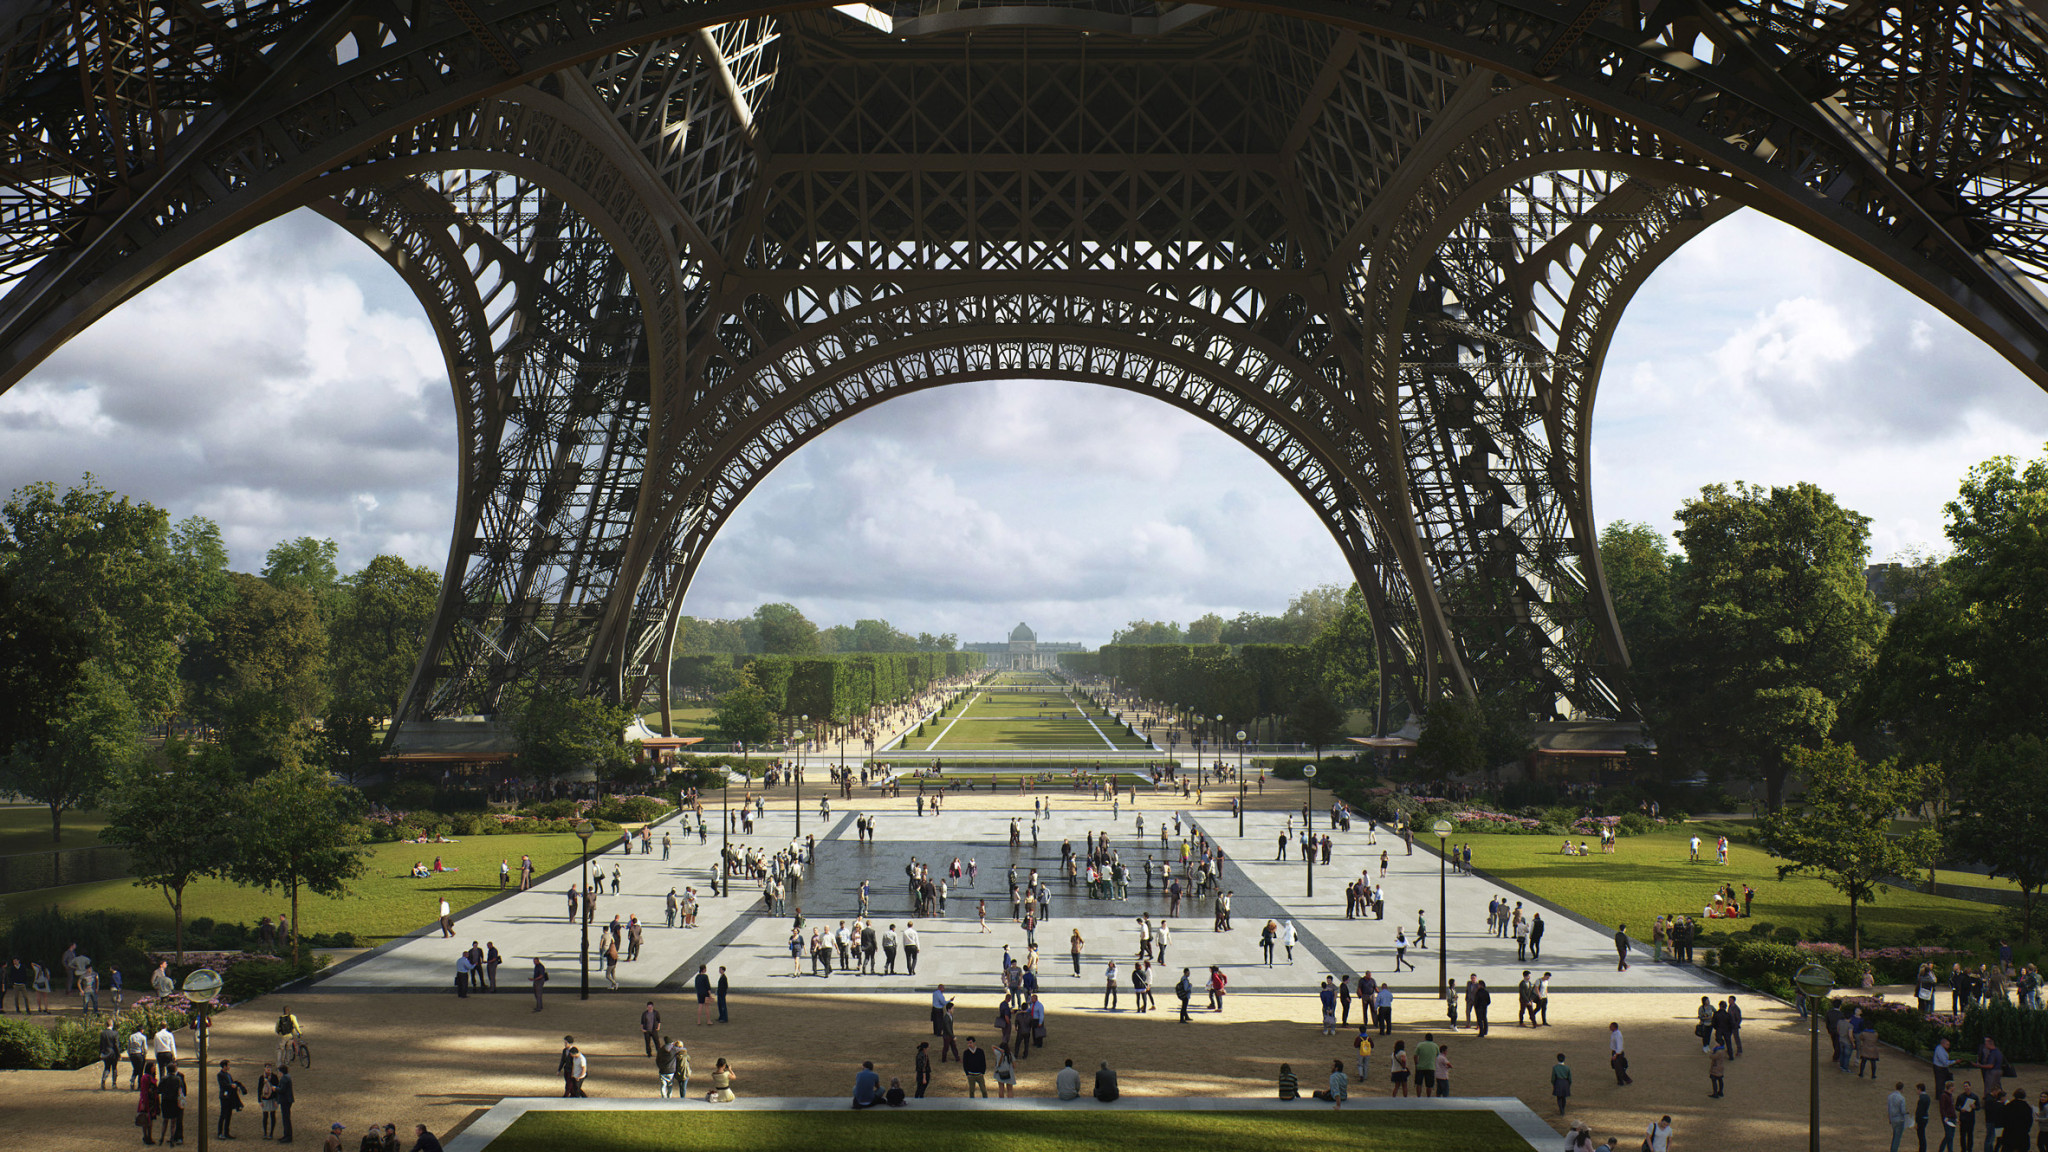 Trees will be planted in all of the new spaces around the Eiffel Tower, contributing to the sustainability of the Paris 2024 Olympic Games ©Gustafson Porter + Bowman